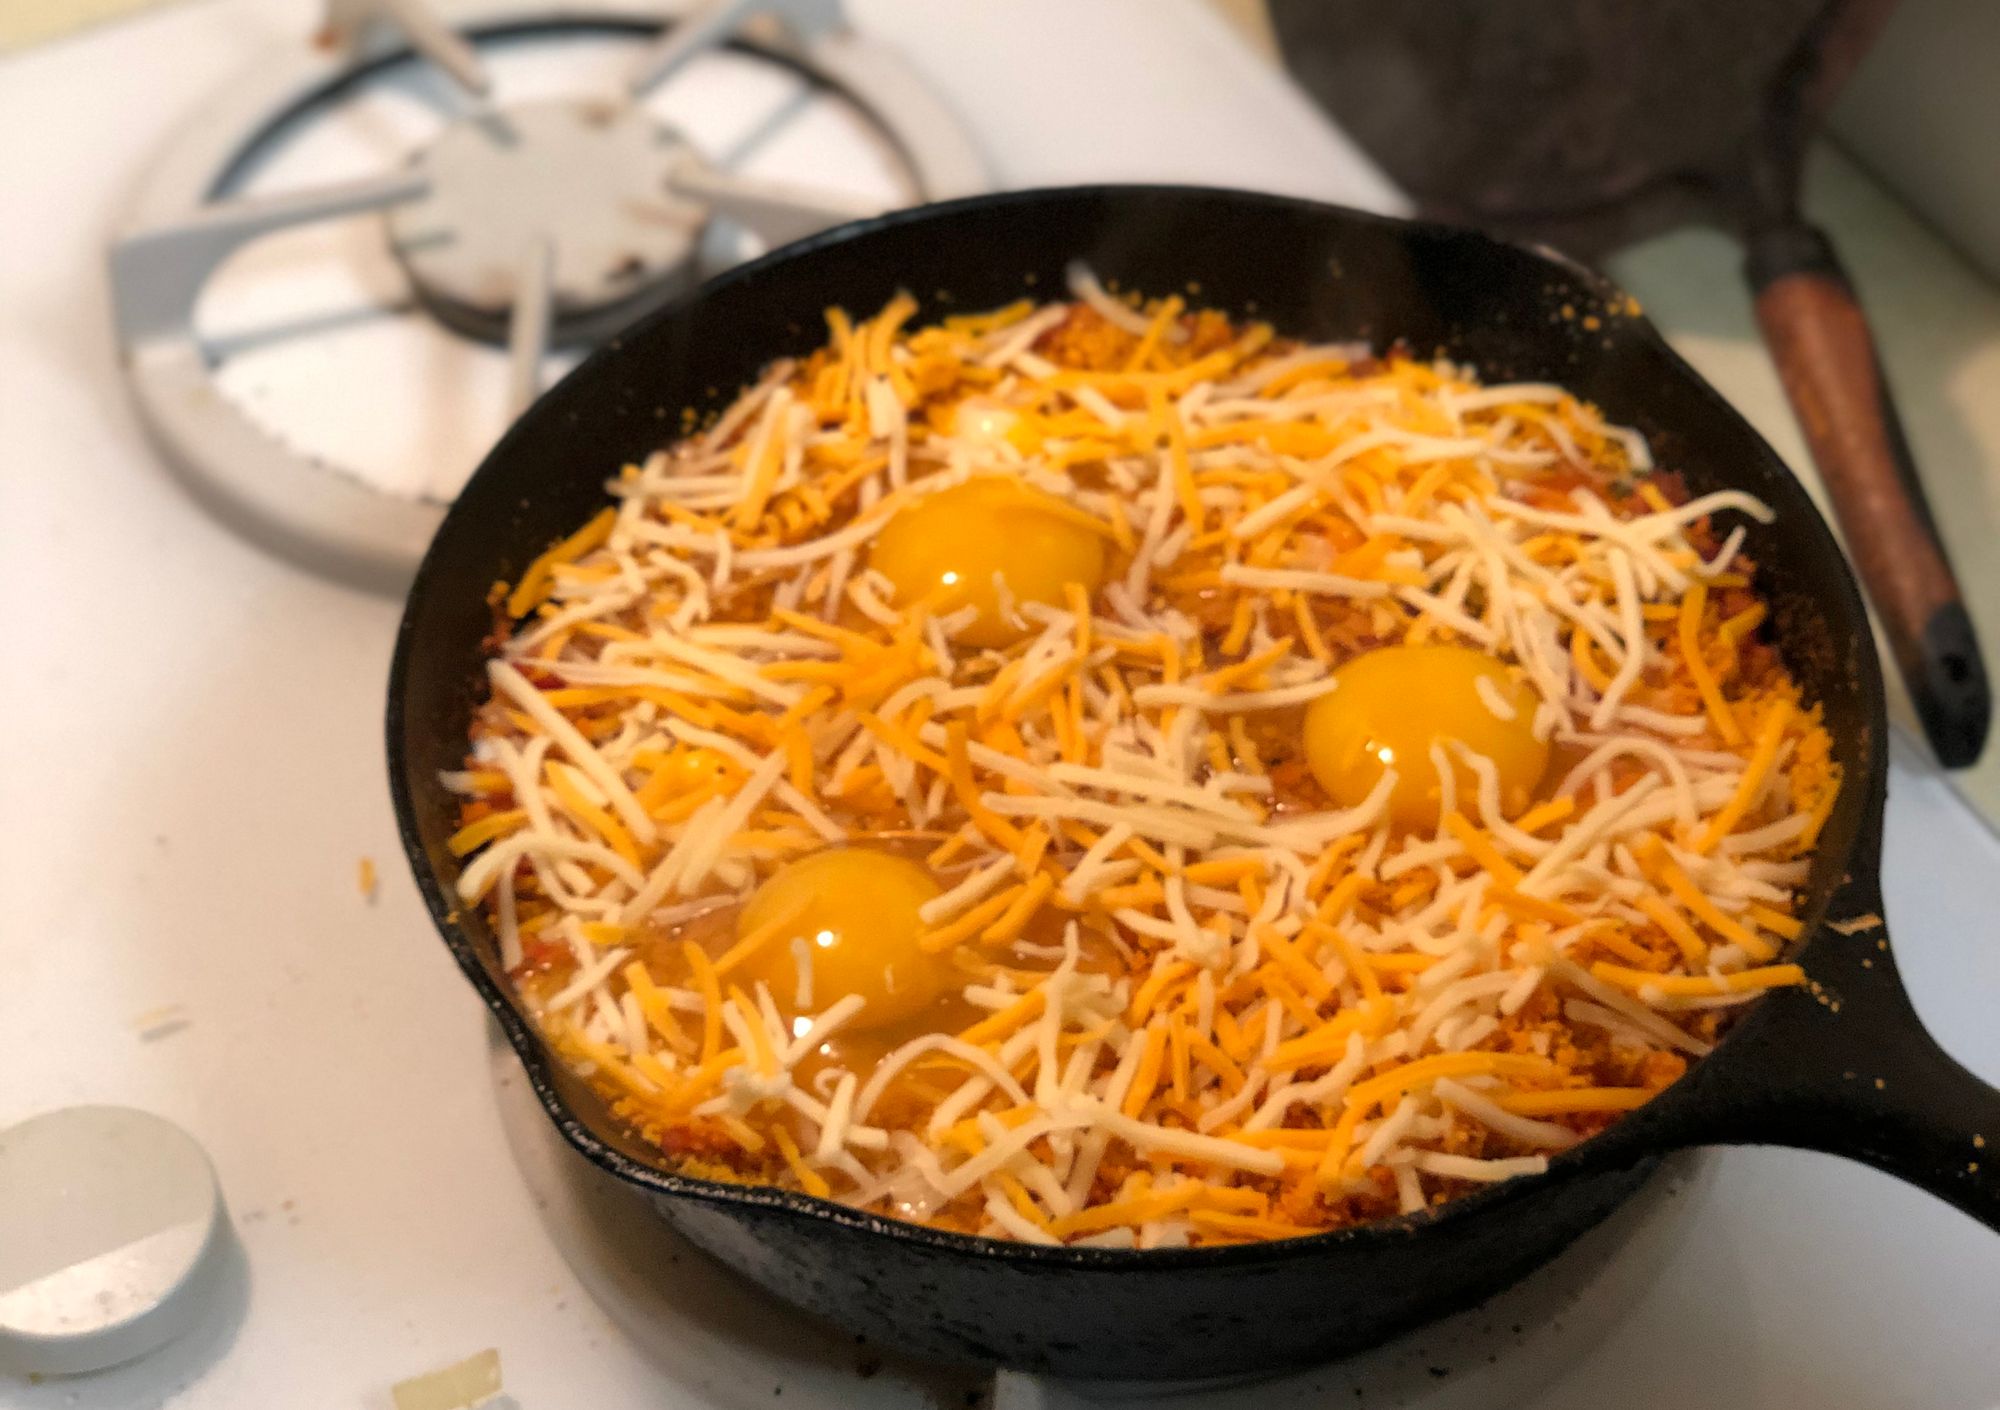 Making shakshuka with Cheez-Its and instant ramen